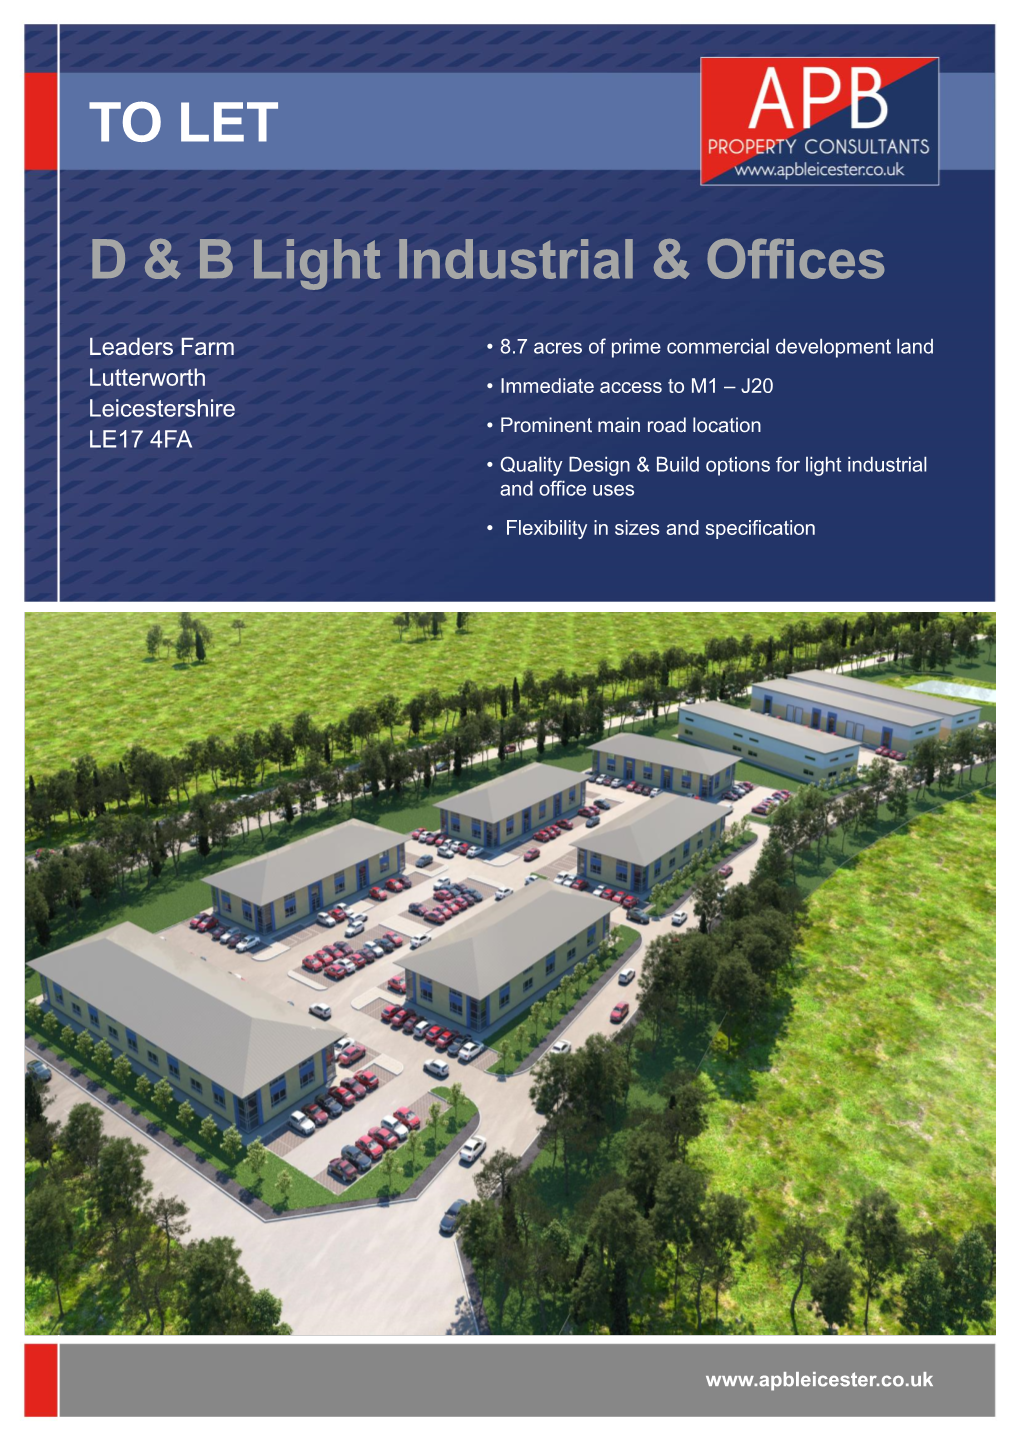 TO LET D & B Light Industrial & Offices